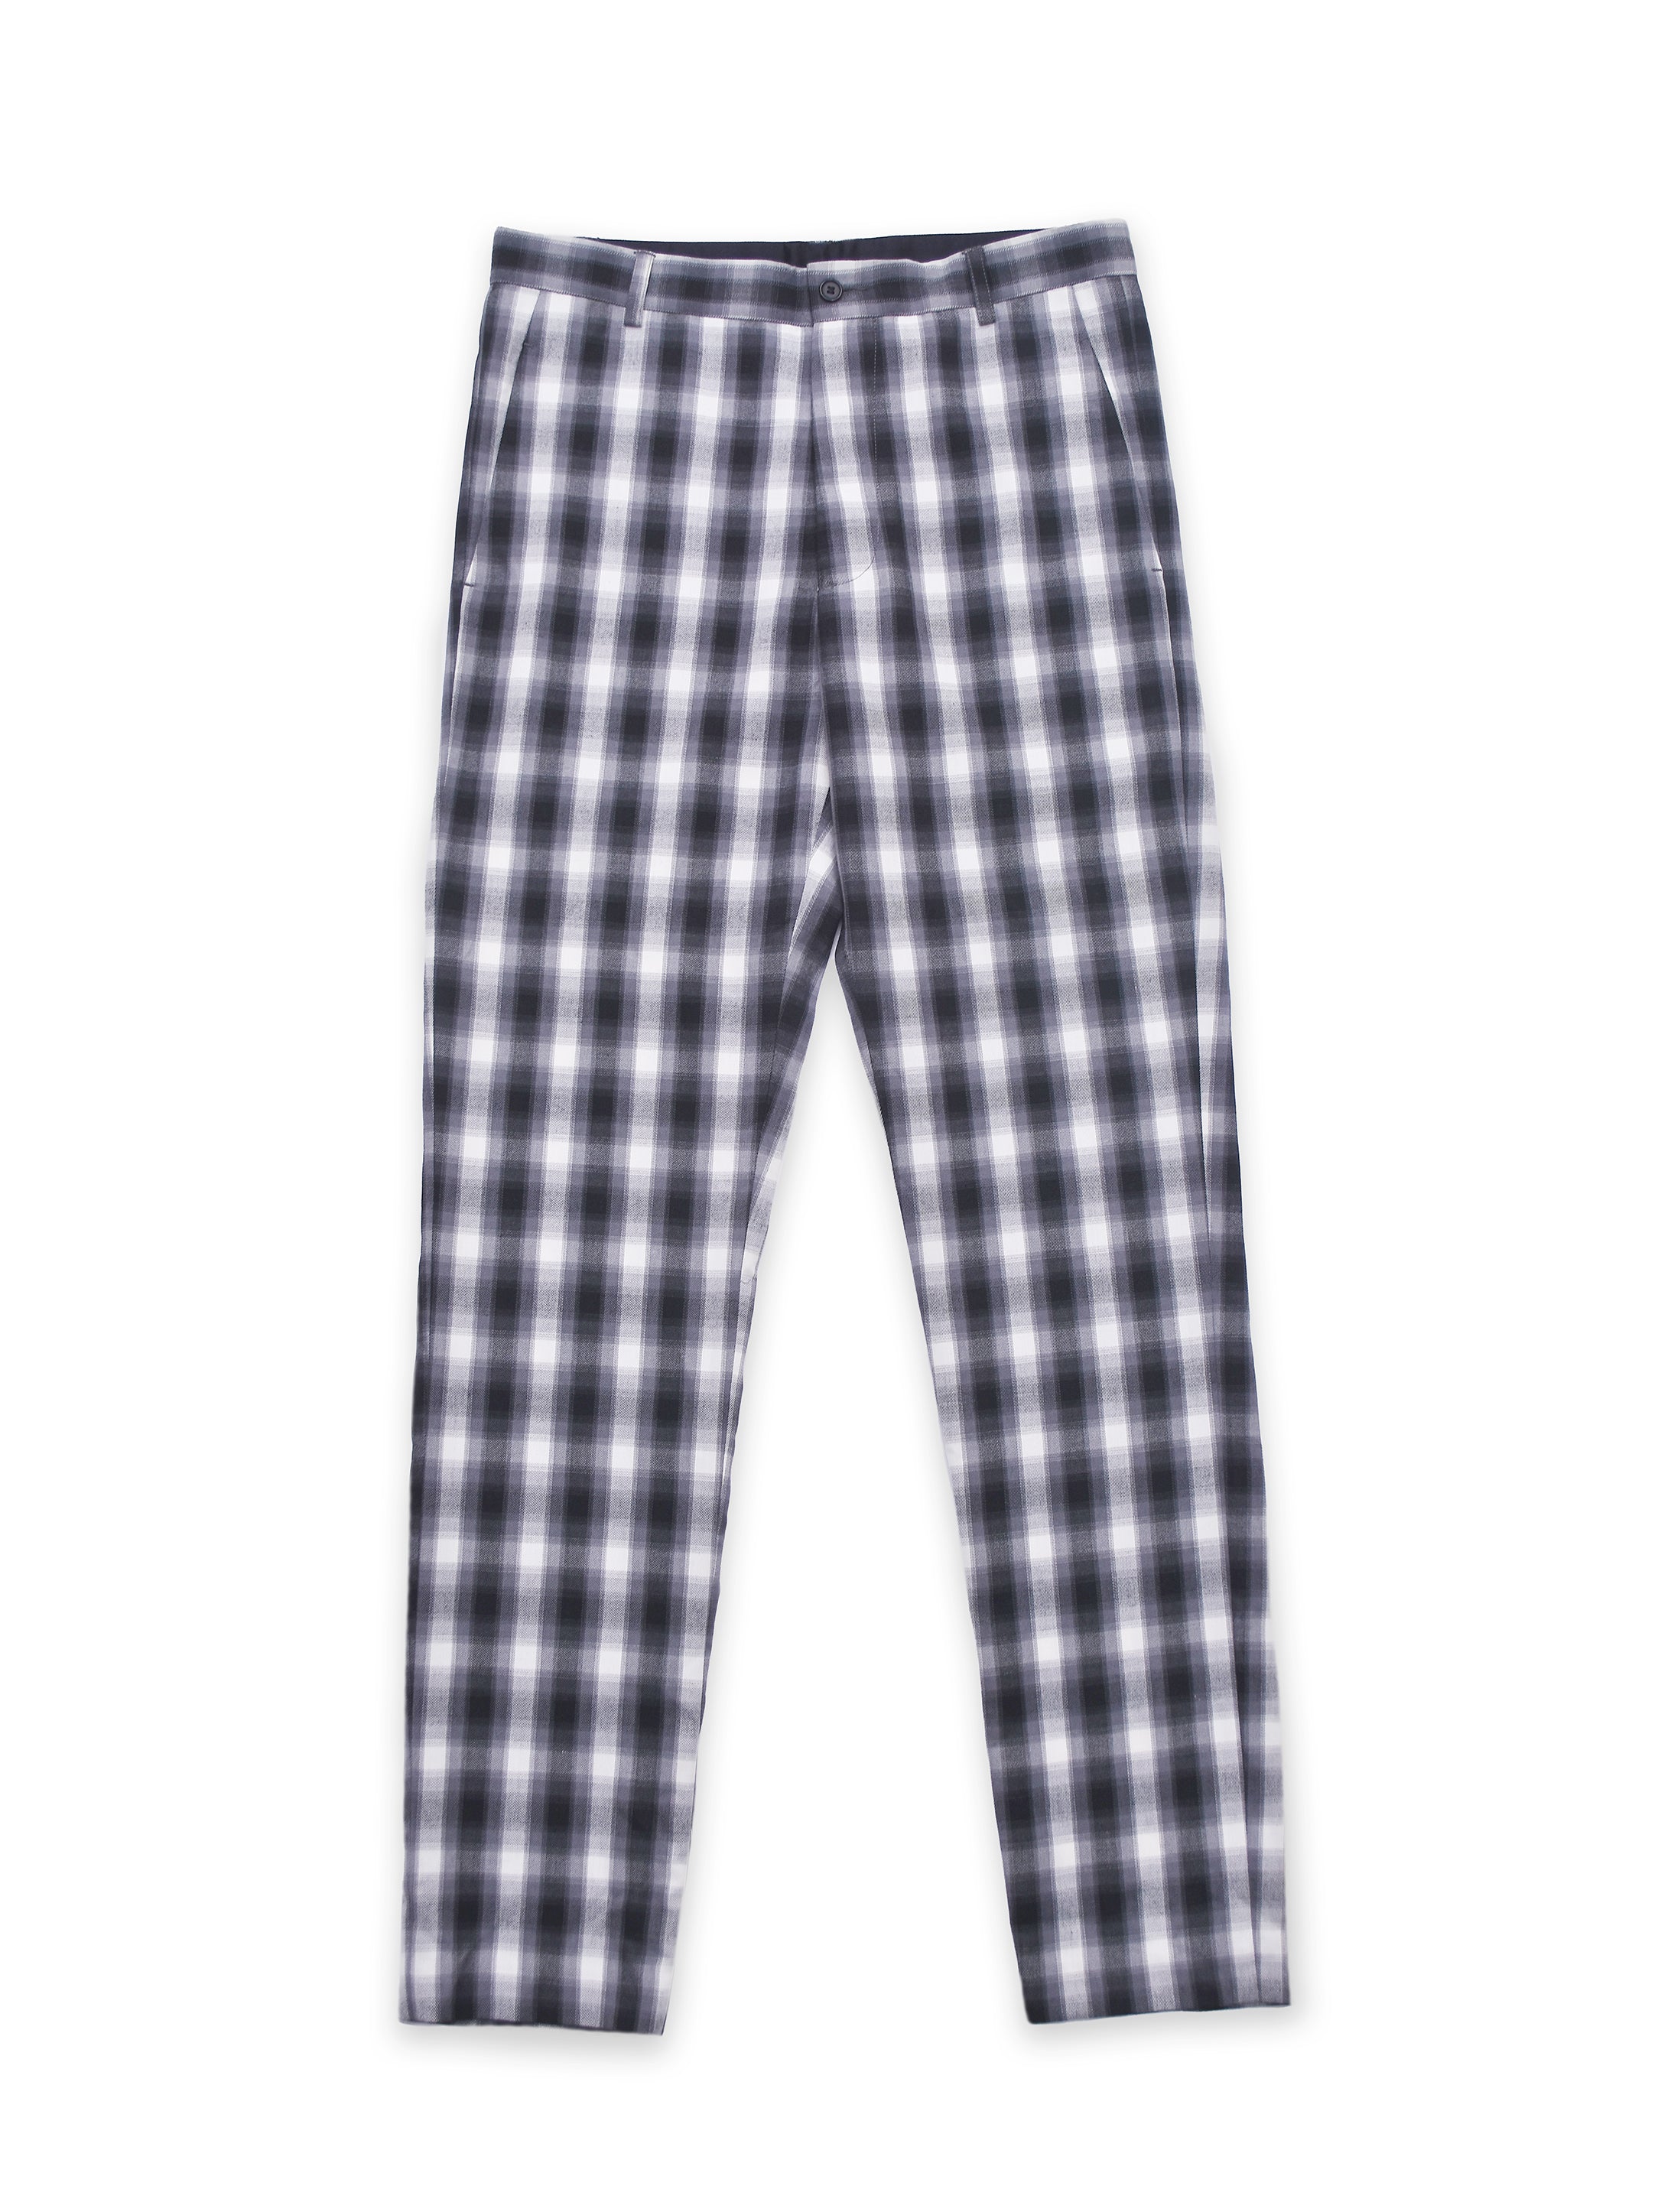 GREY TONES CHECKED TROUSERS